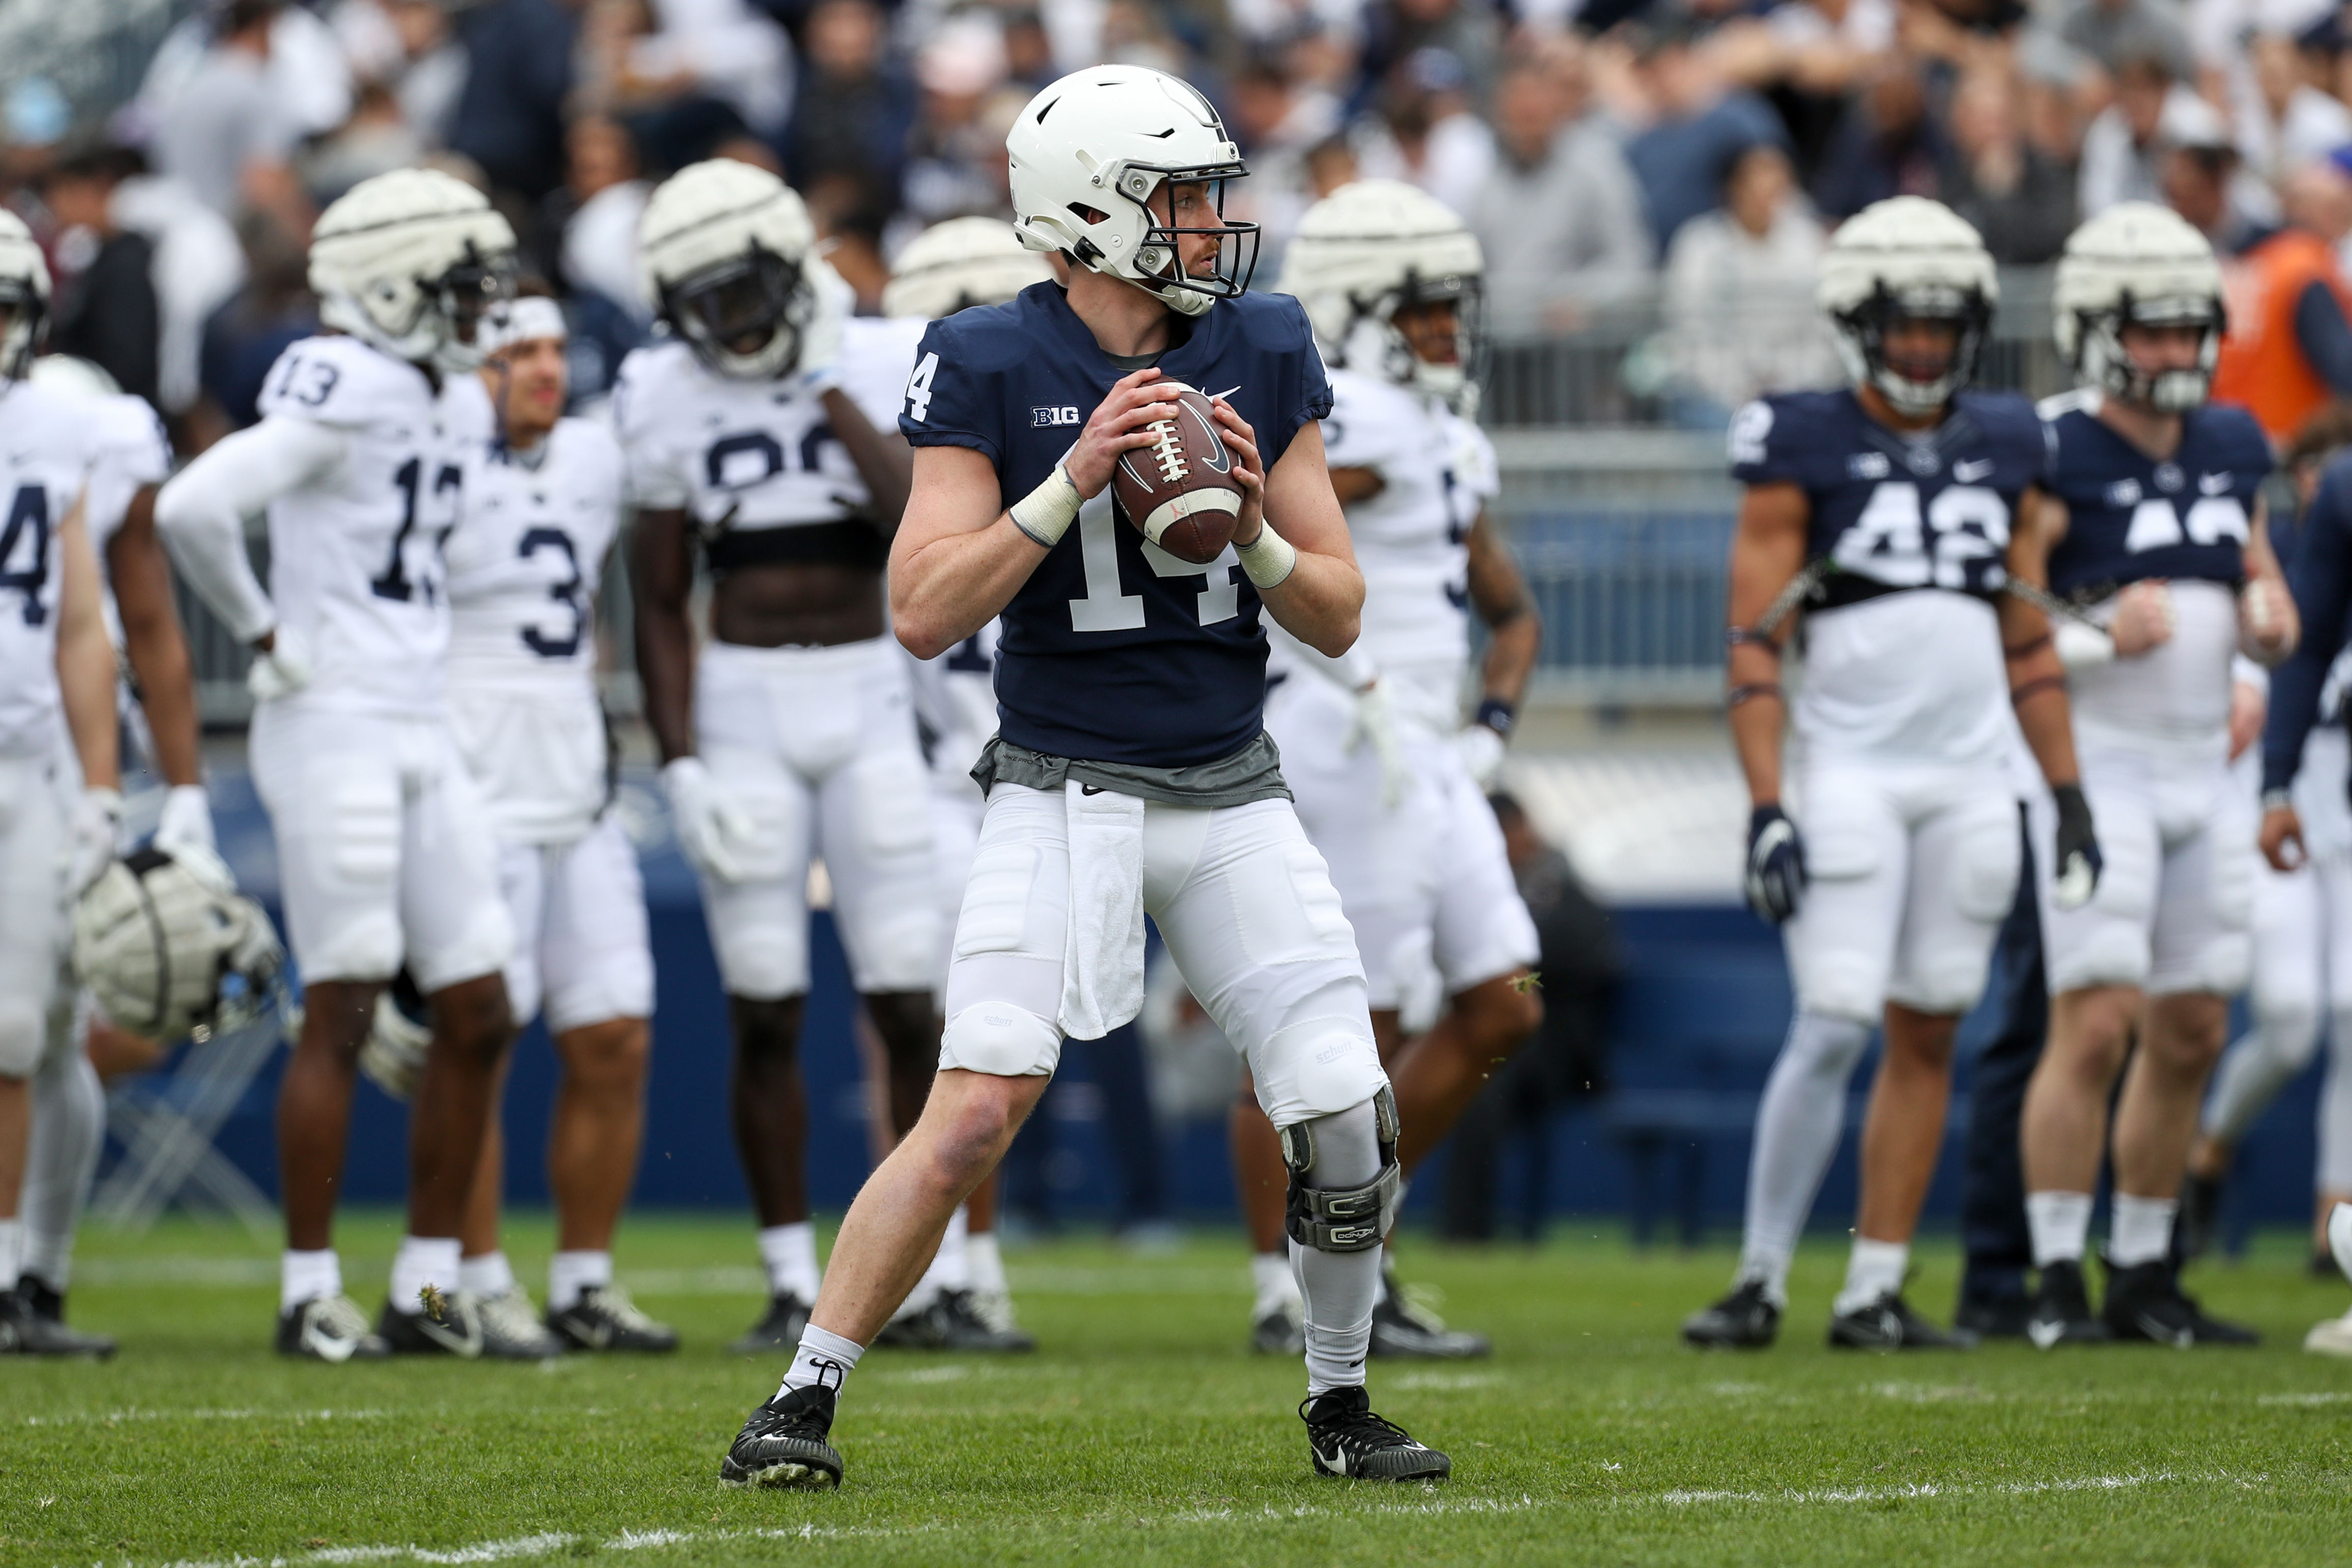 Penn State Nittany Lions quarterback Sean Clifford (14) looks to throw a pass during a warm up prior to the Blue White spring game at Beaver Stadium.